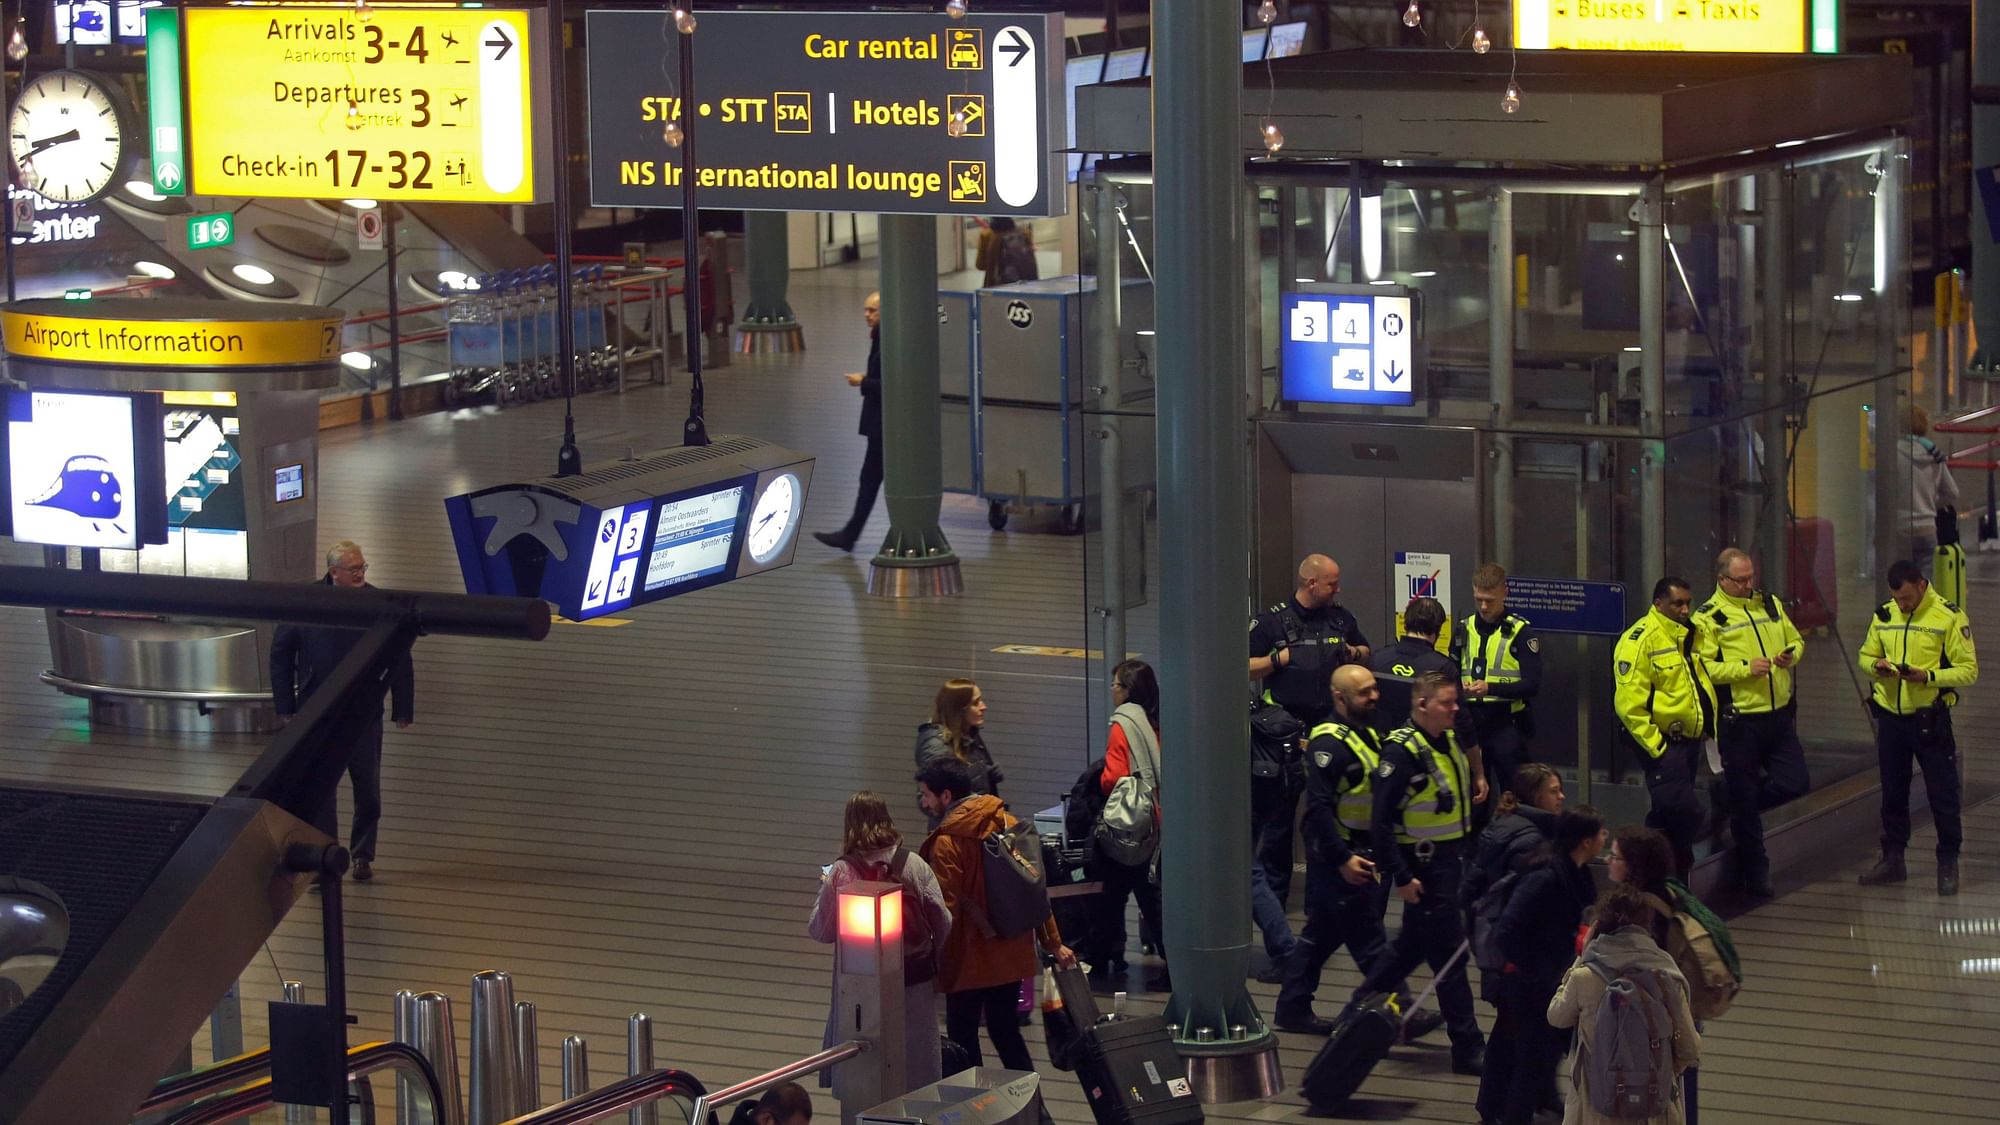 Dutch police mill about after a threat at Schiphol airport in Amsterdam, Netherlands, Wednesday, 6 Nov 2019